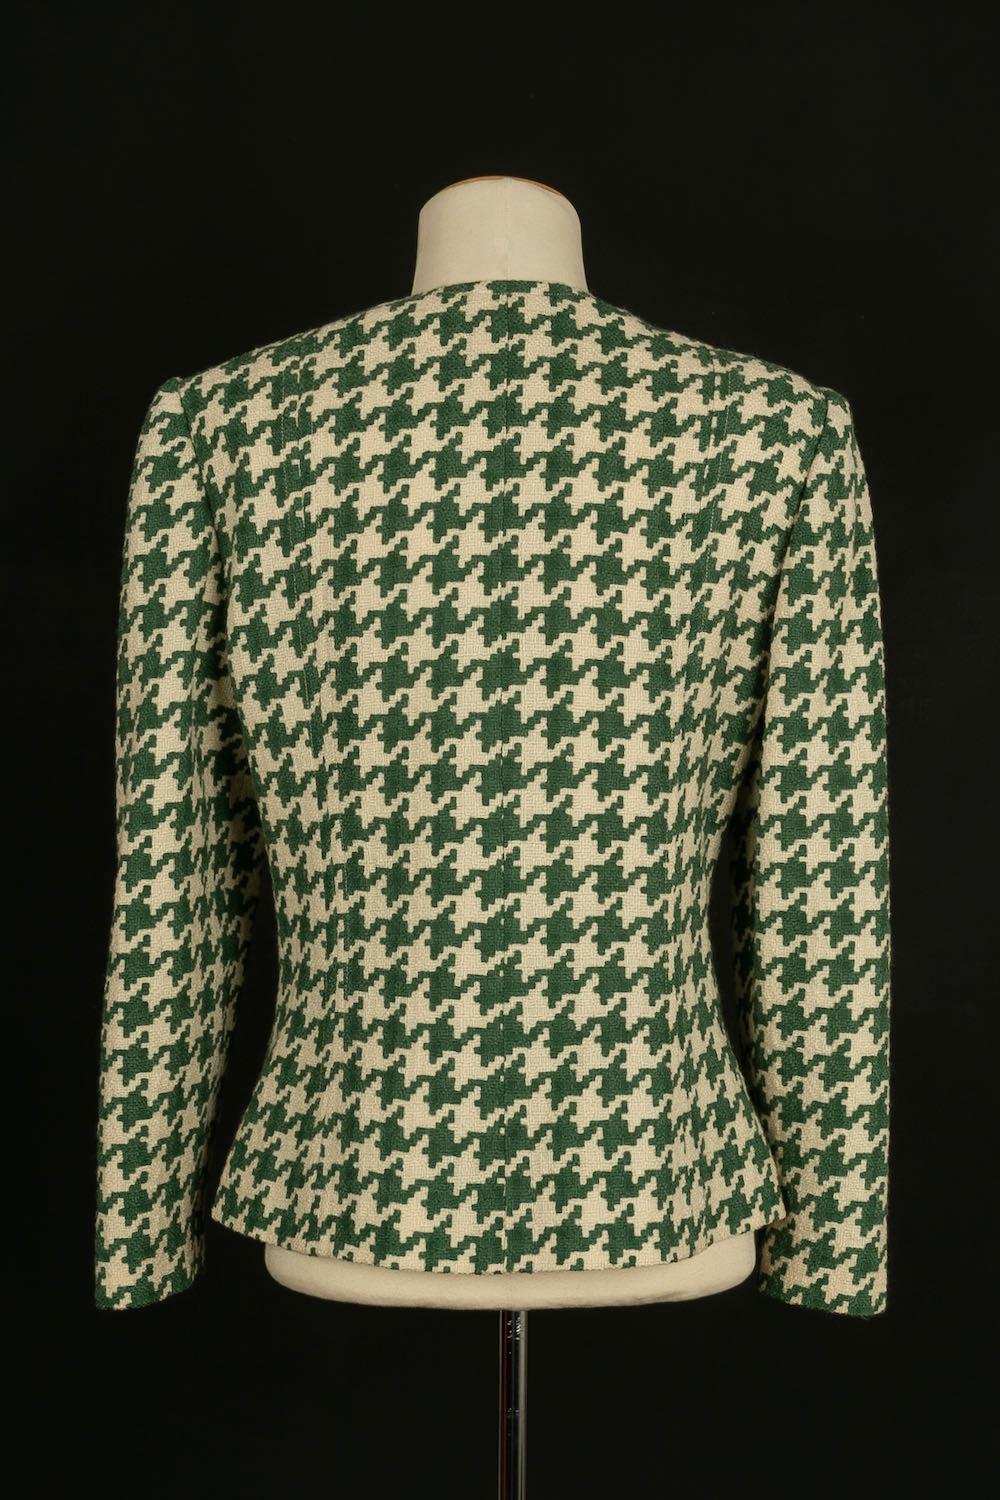 Nina Ricci Woolen Outfit with Green Houndstooth Pattern For Sale 2